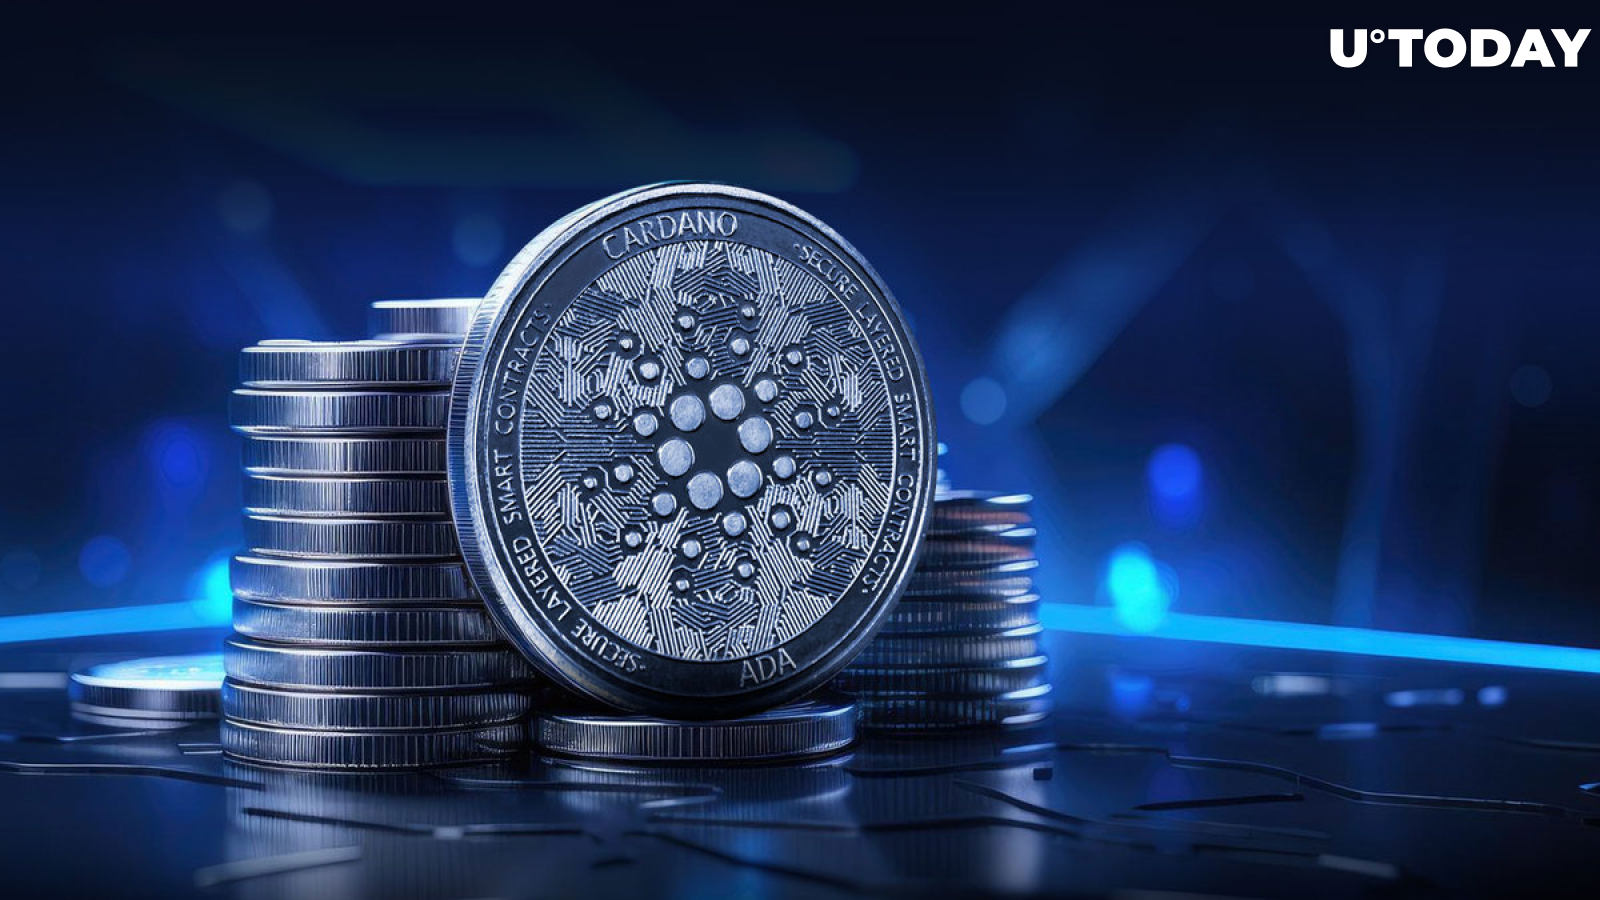 Cardano (ADA) Wallet Gets Important Update, What's New?